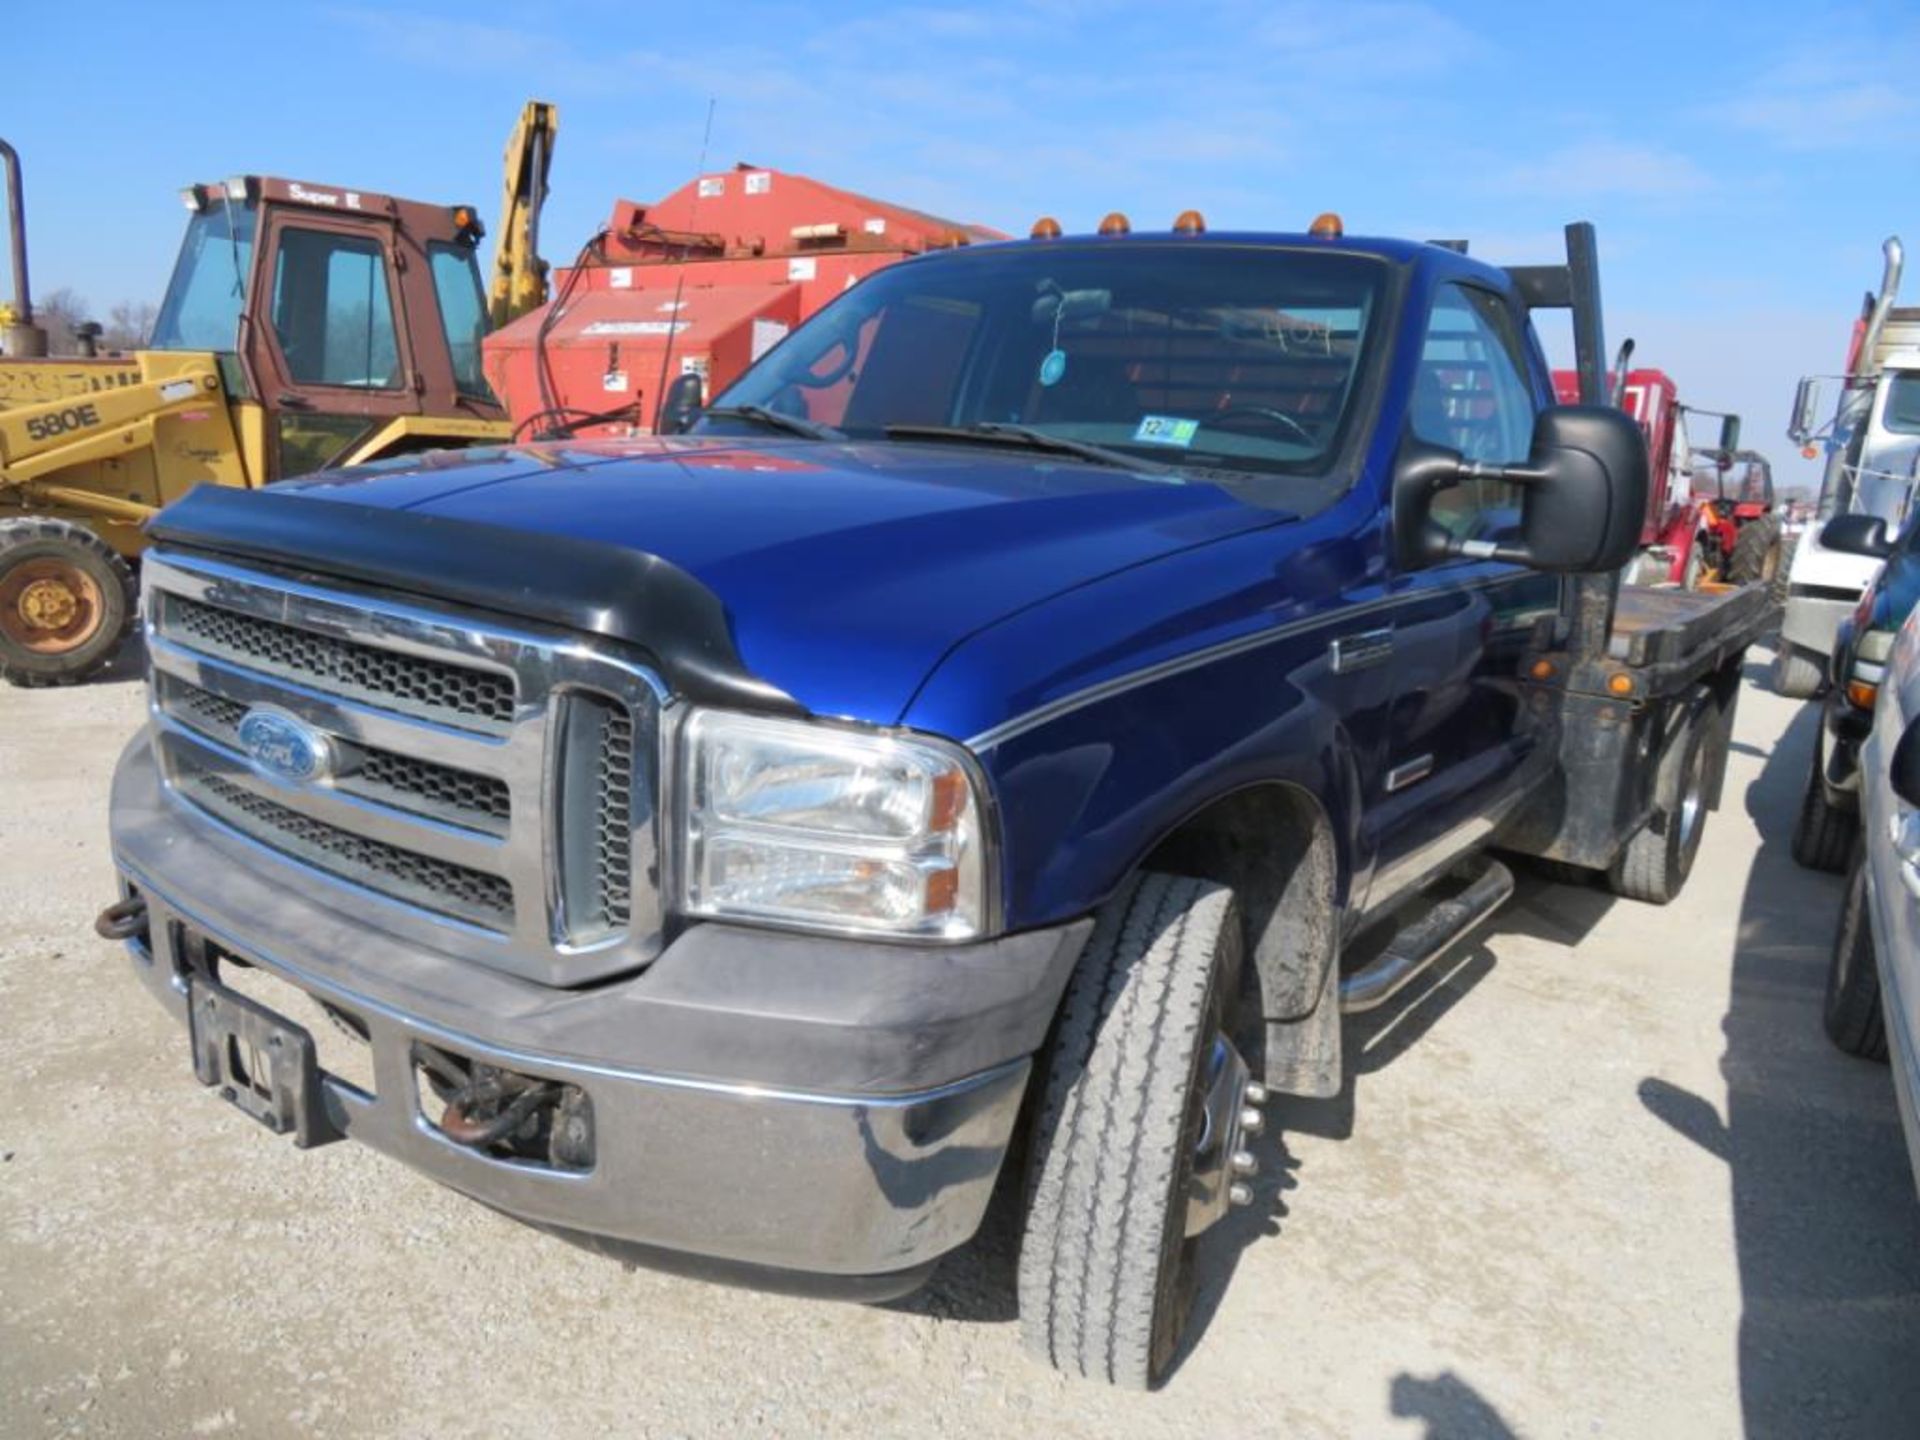 2000 F350 Reg Cab Dually Flatbed (title) 4x4, 6sp 260,100 miles, 7.3 Diesel New Transmission